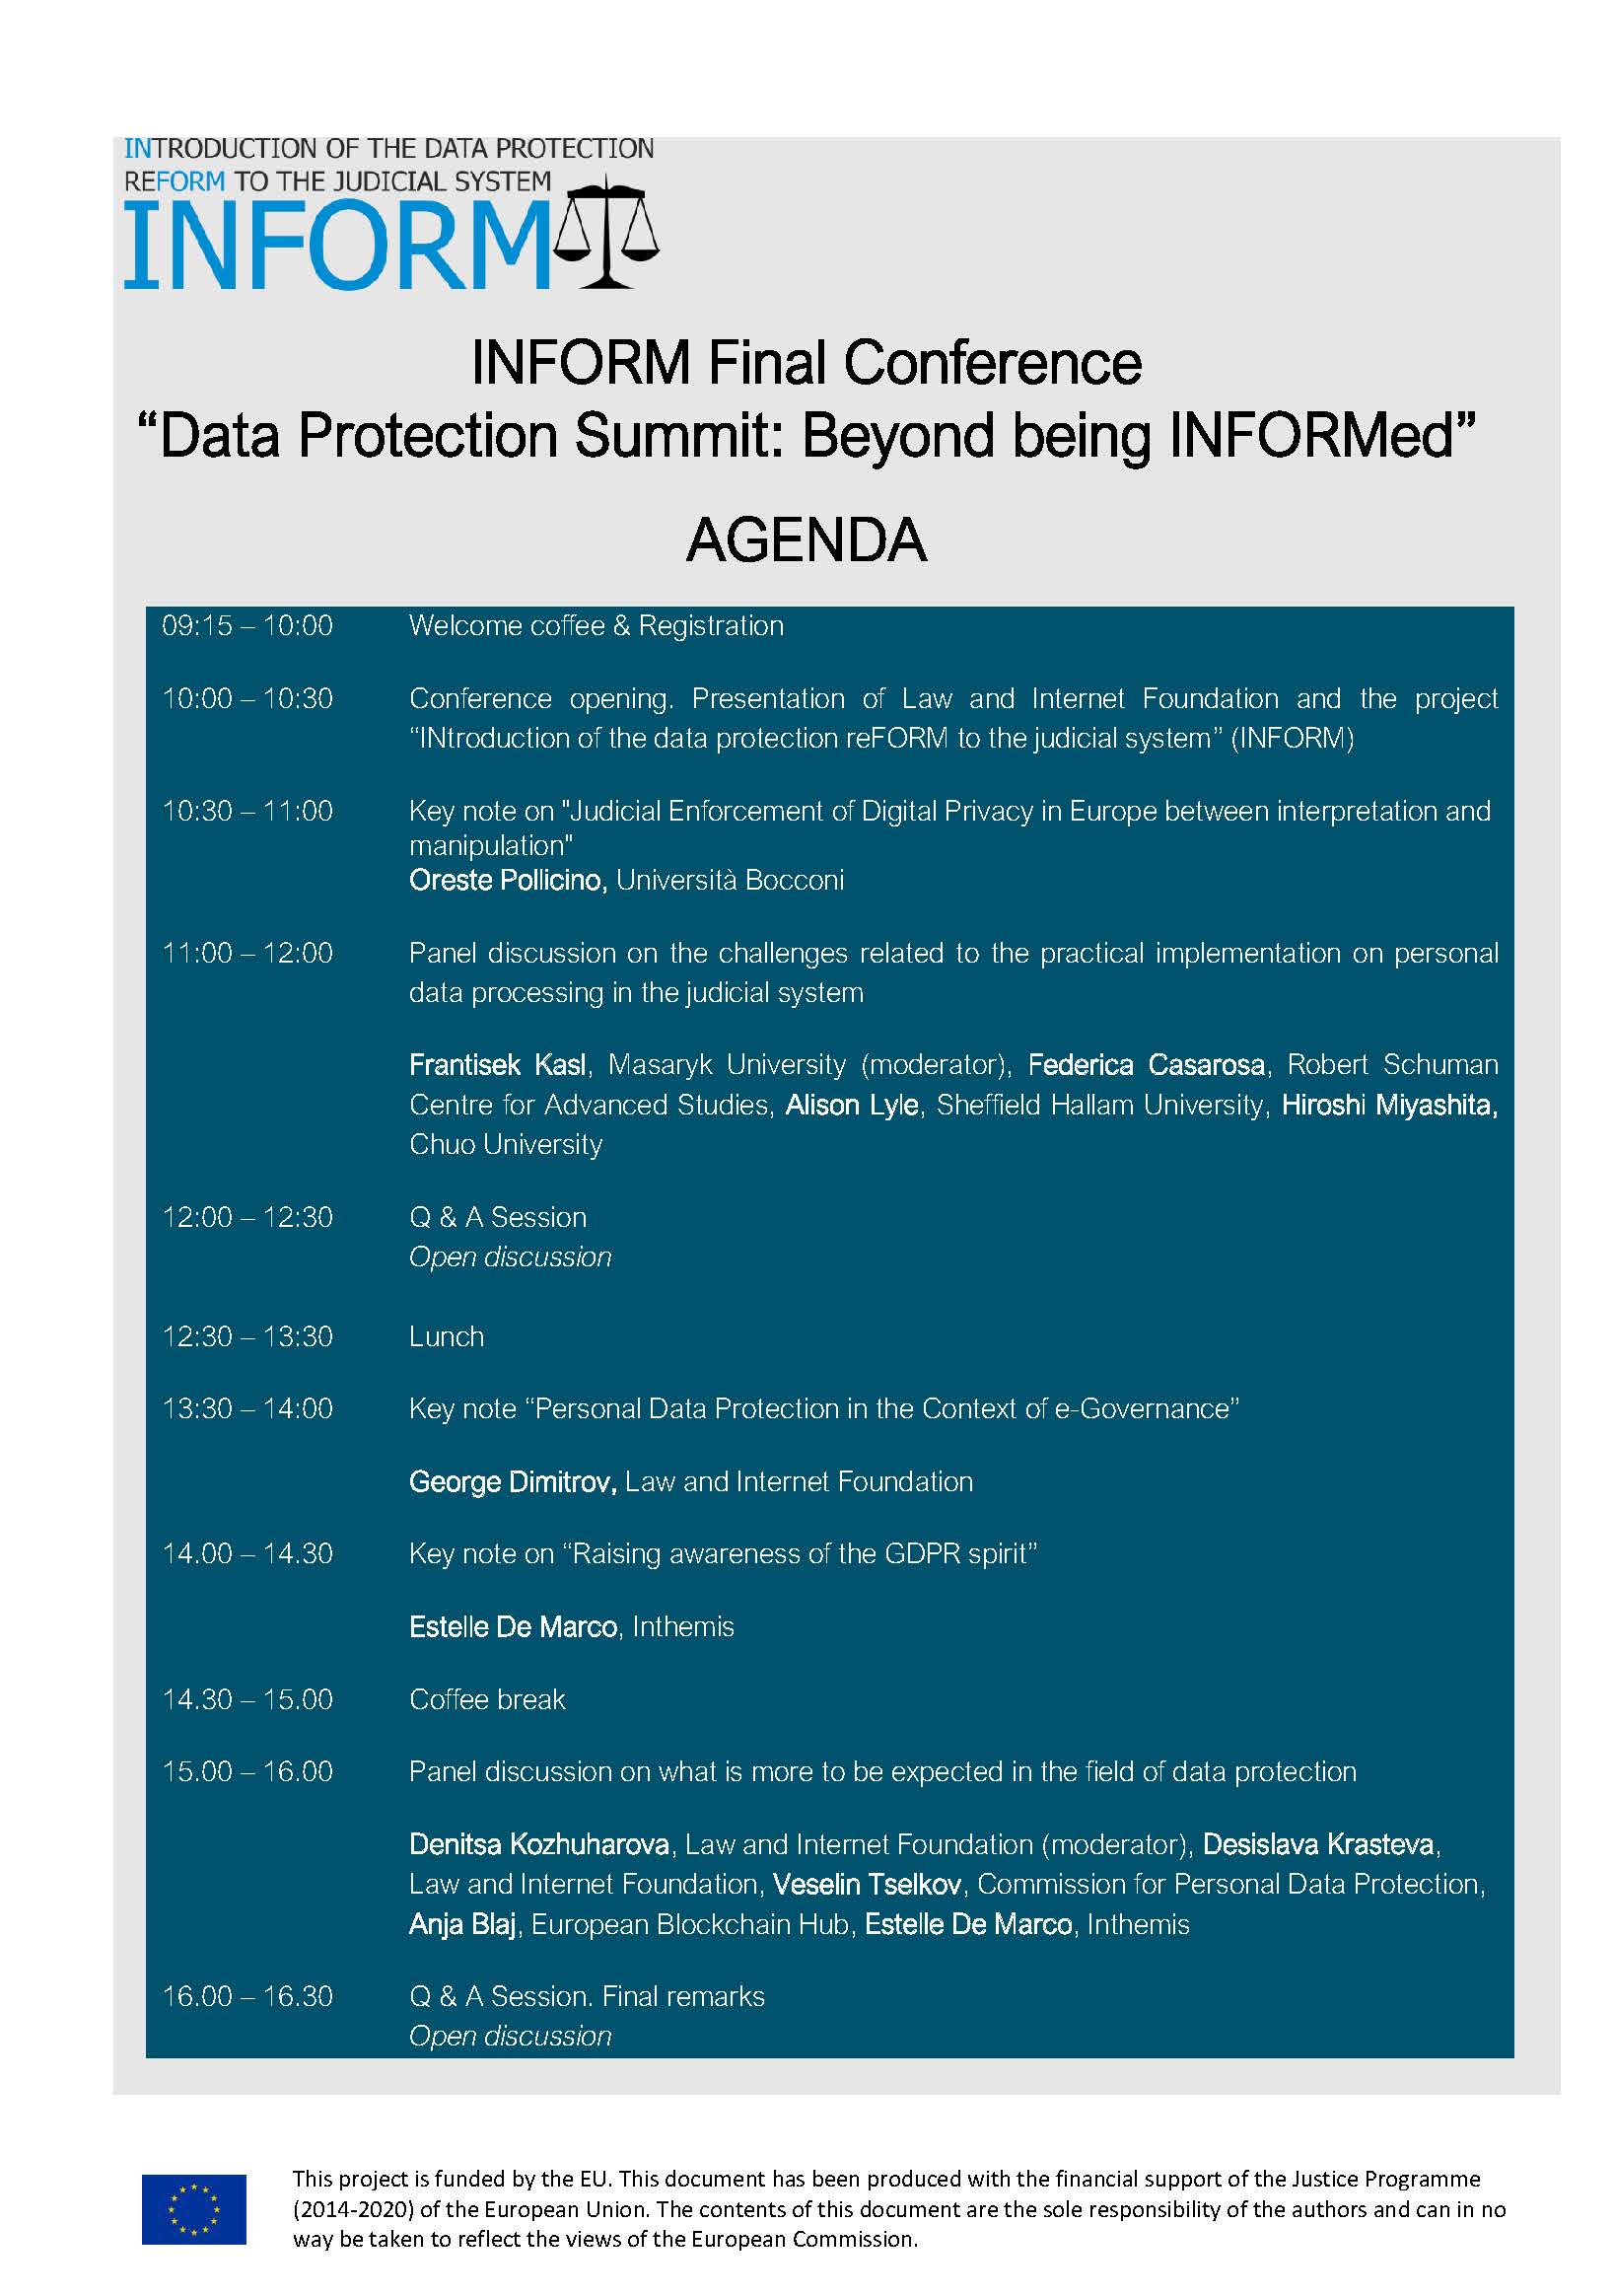 INFORM Final Conference “Data Protection Summit Beyond being INFORMed